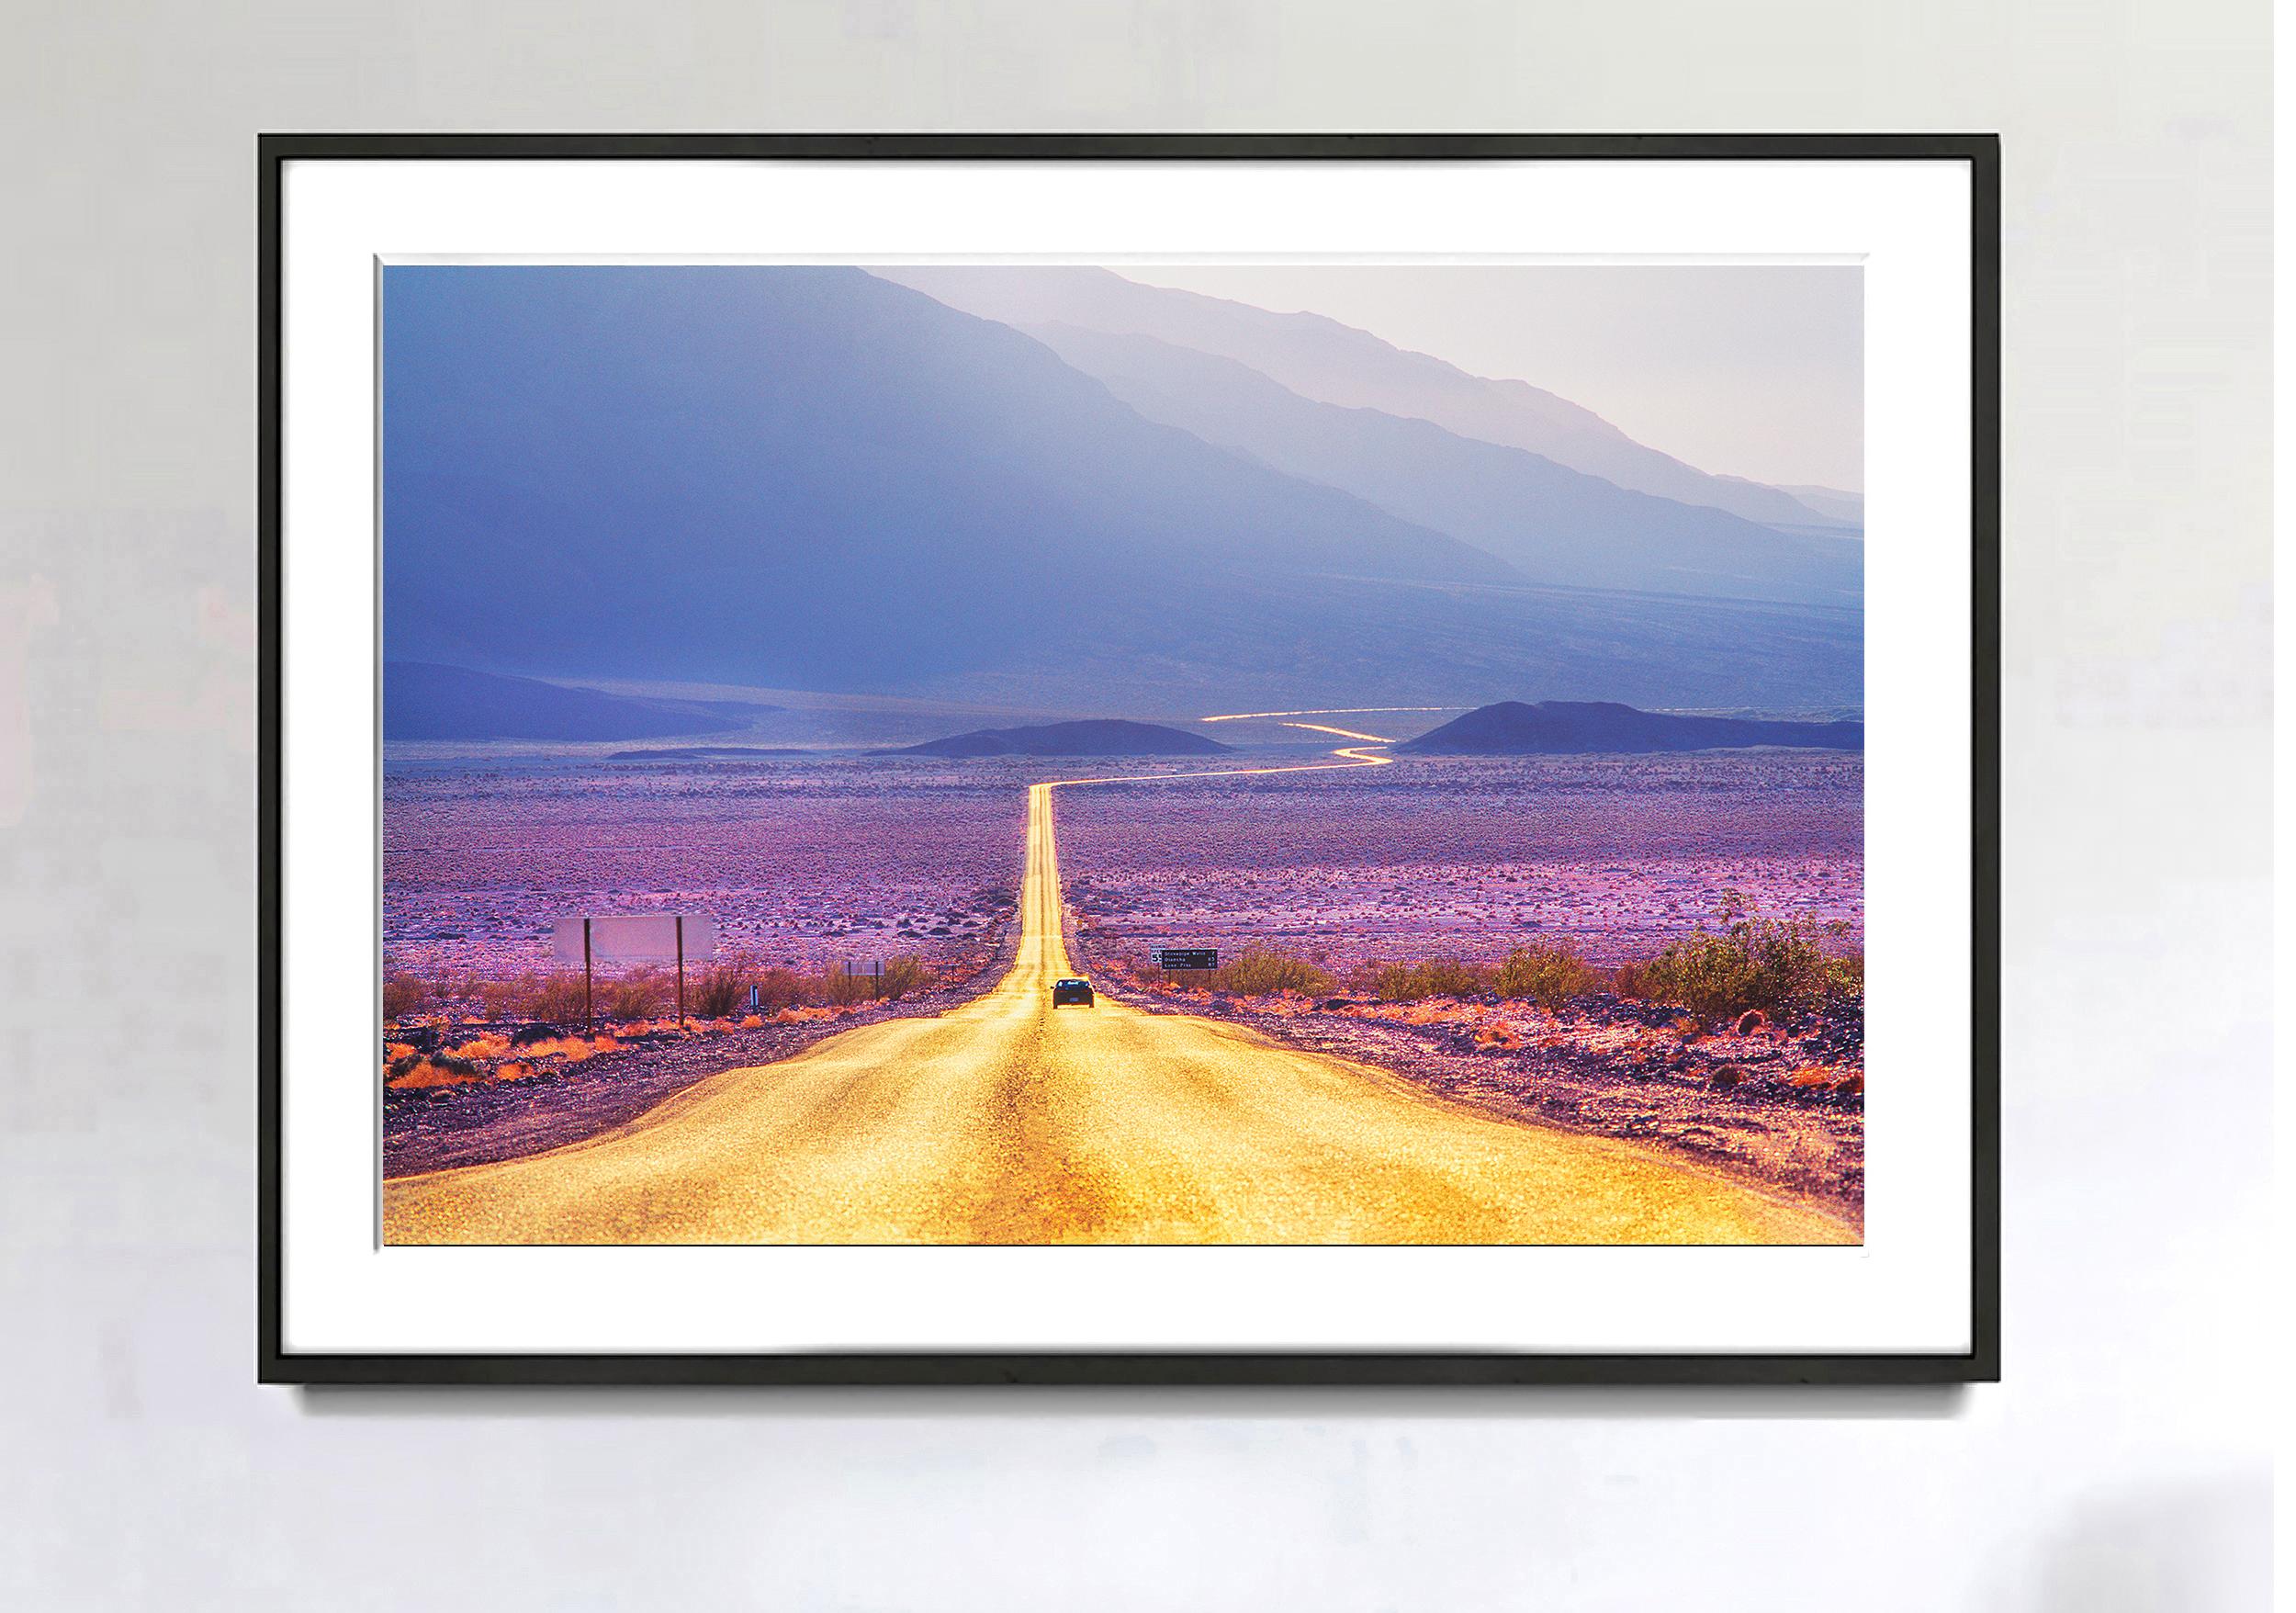 Man is dwarfed by nature. A long golden road winds through the vast expanses and monumentality of the American West. The grandeur of the surrounding landscape minimizes a single car; the warm color scheme of the road seamlessly integrates with